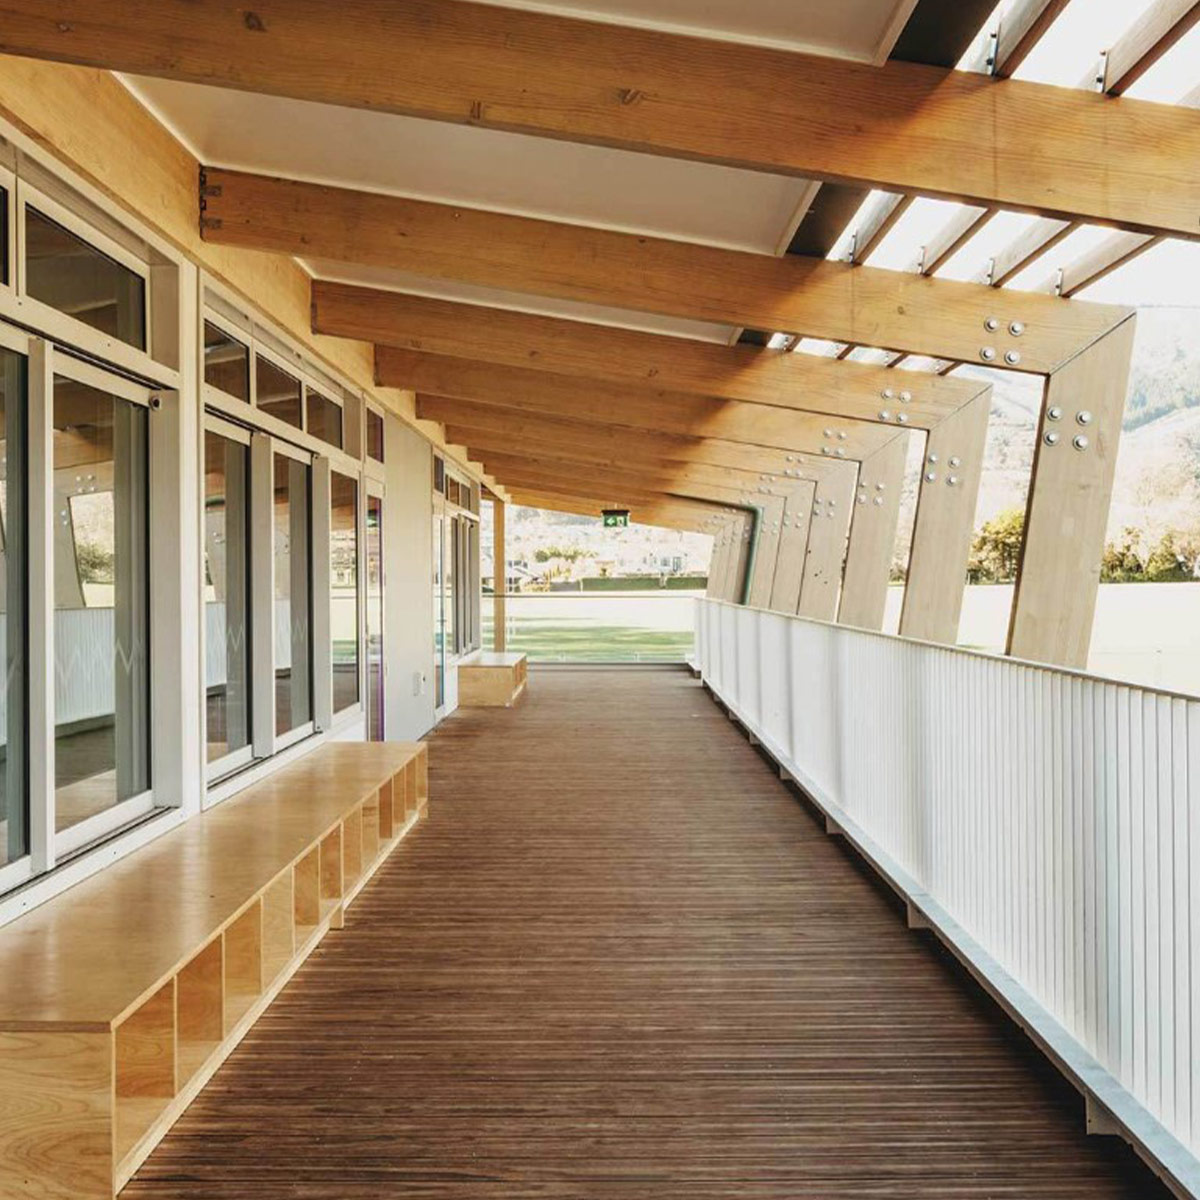 image of Resysta decking sold by Pacific American Lumber